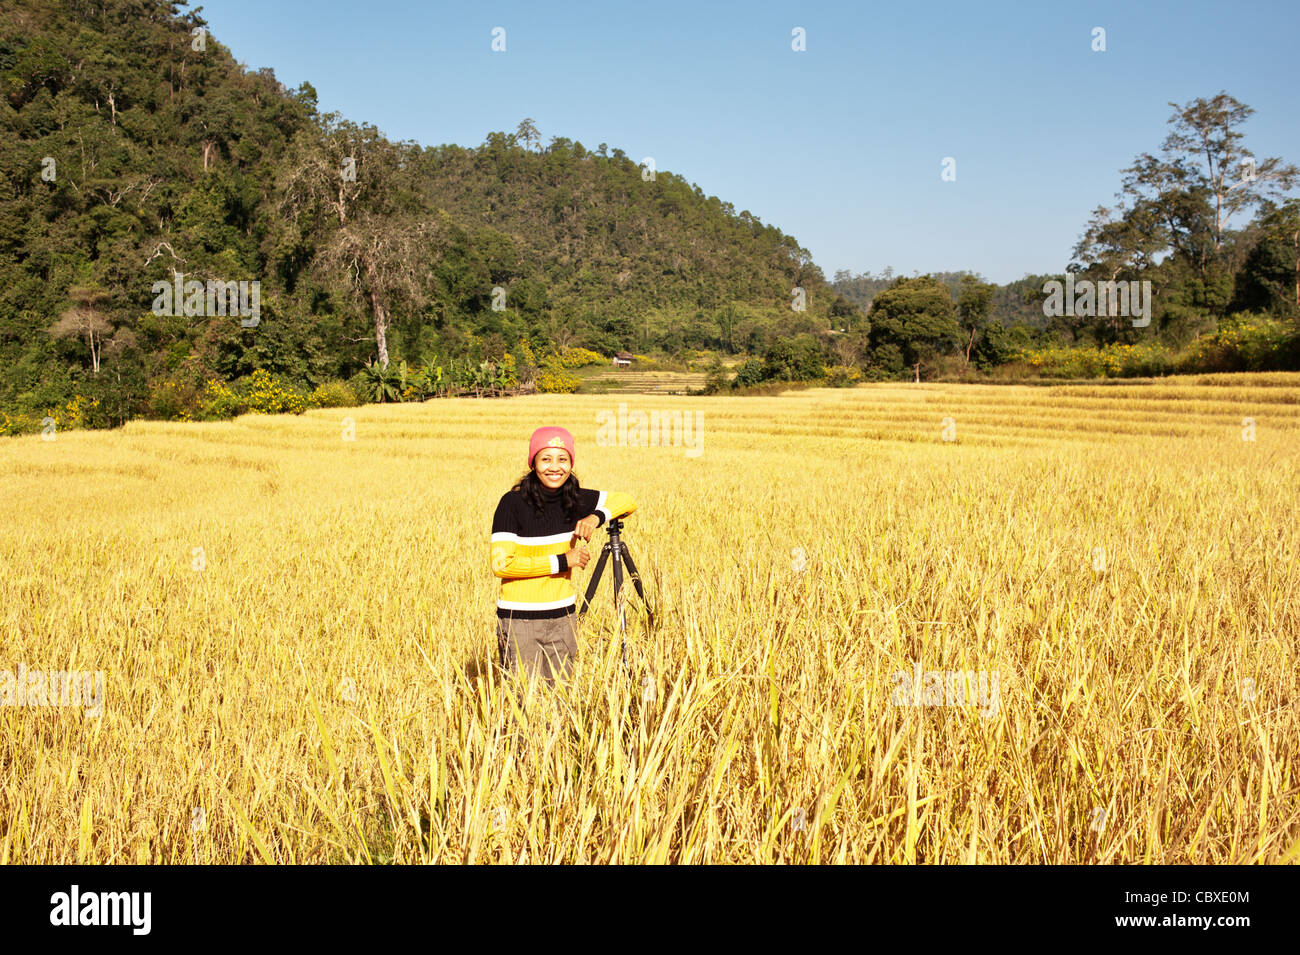 Woman leaning on a tripod, standing in a rice field ready for harvest, Thailand, Asia Stock Photo